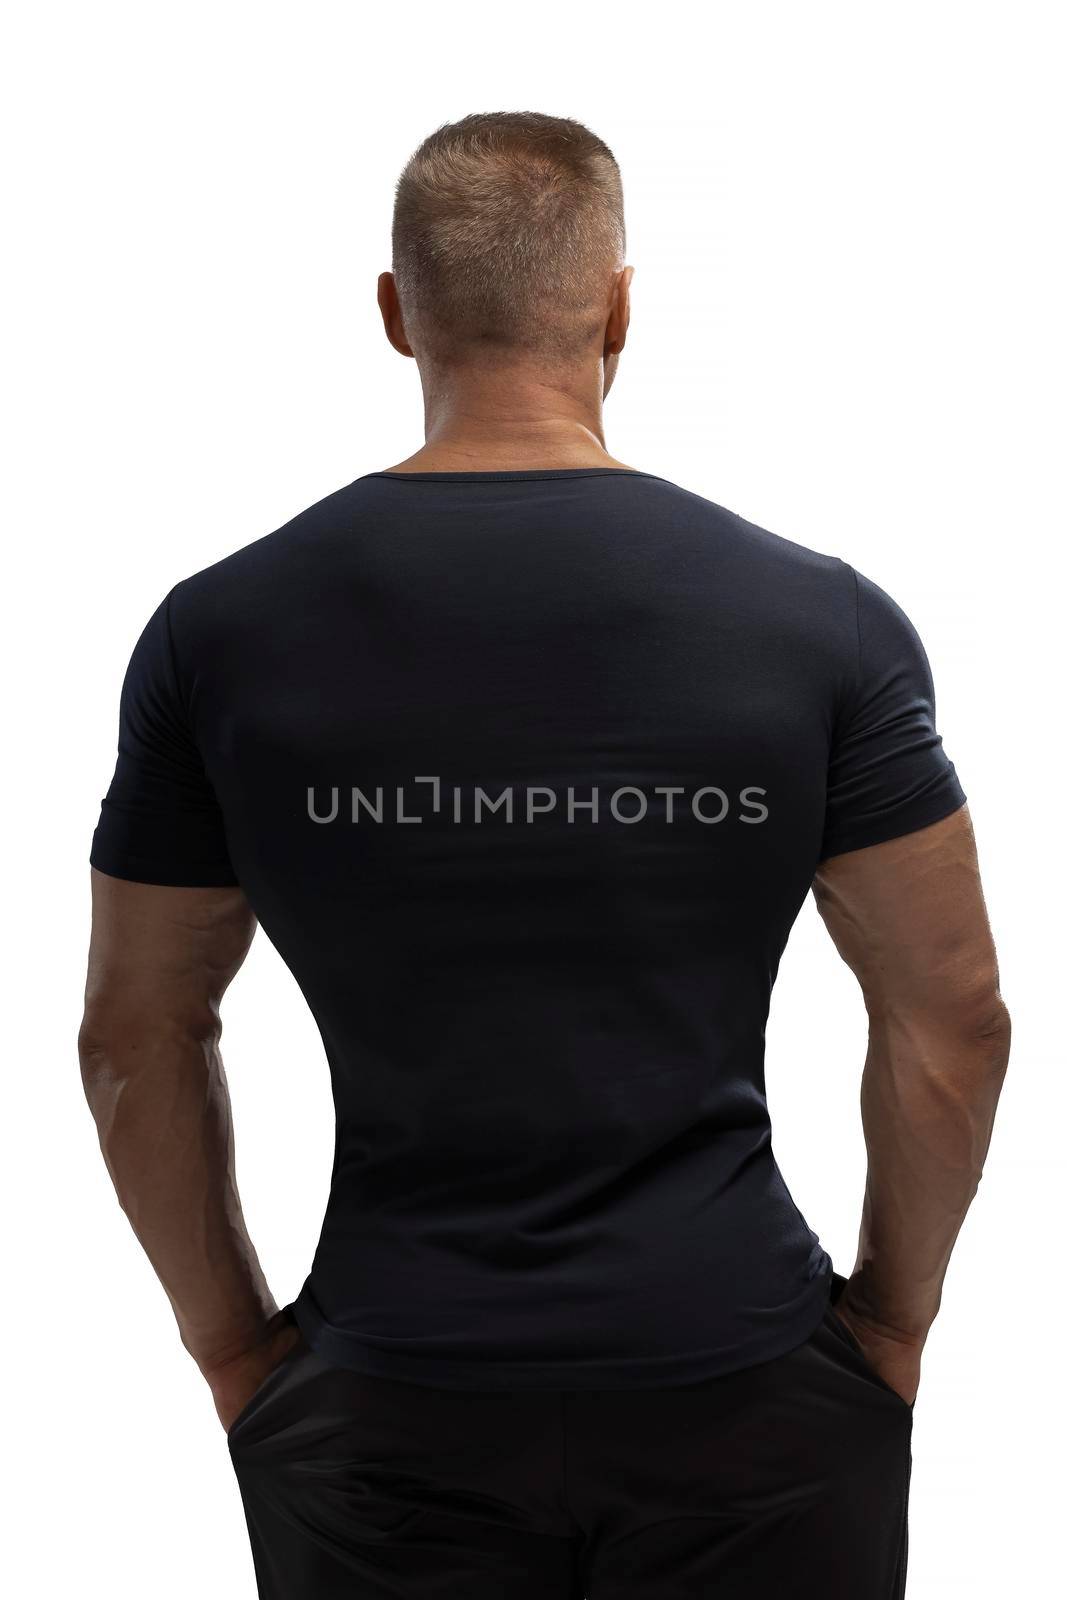 Handsome athletic man posing in T-shirt on a white background by but_photo